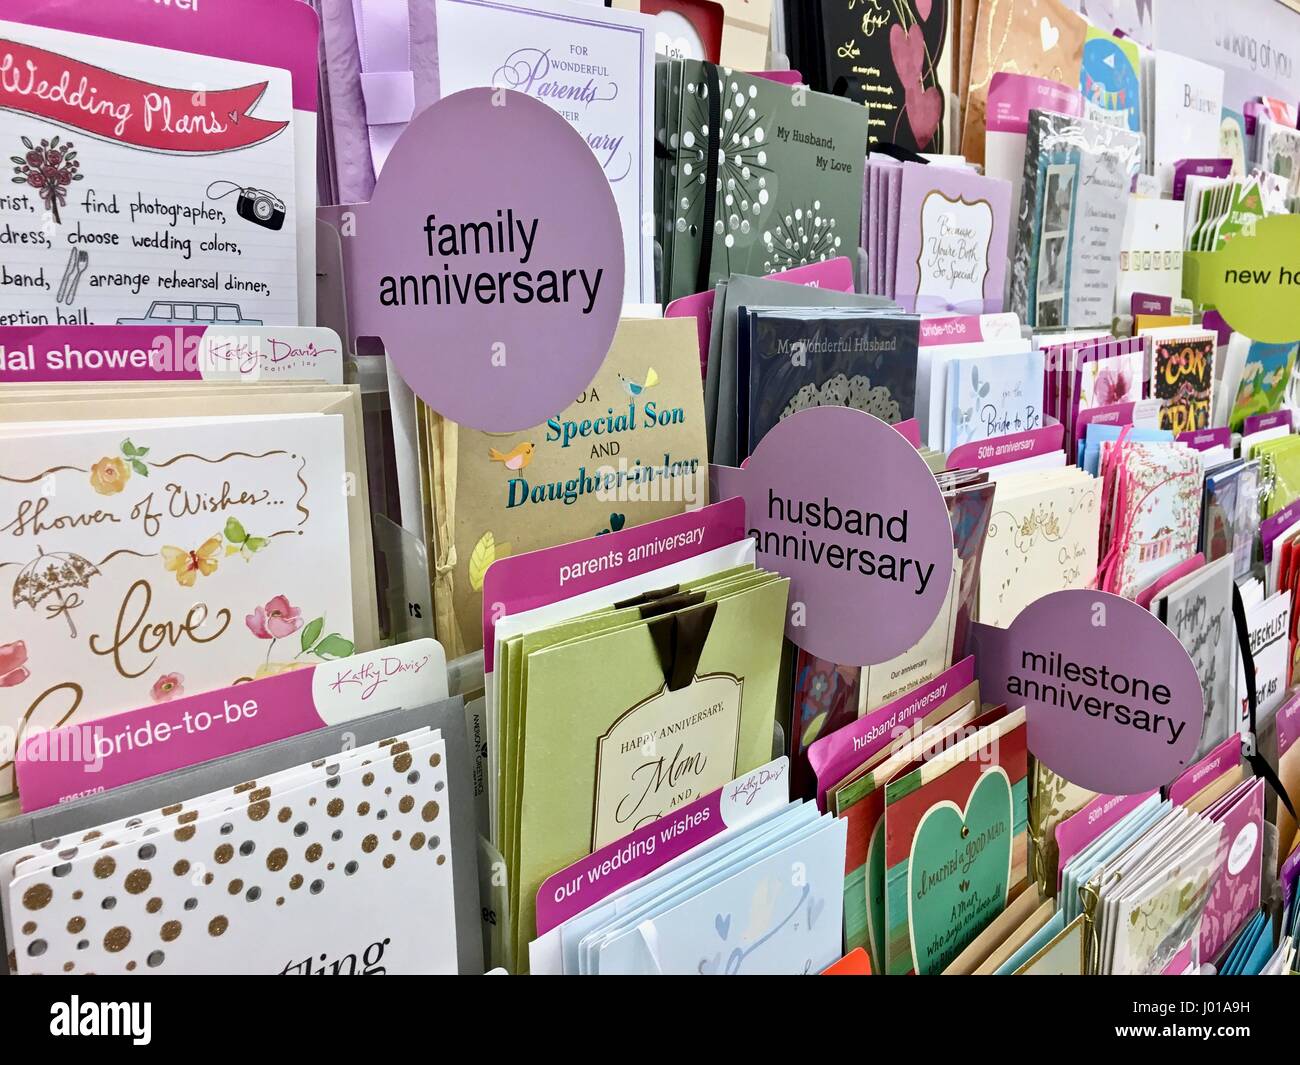 Greeting cards, birthday cards, romantic cards, get well cards, holiday cards at a grocery store card shop Stock Photo